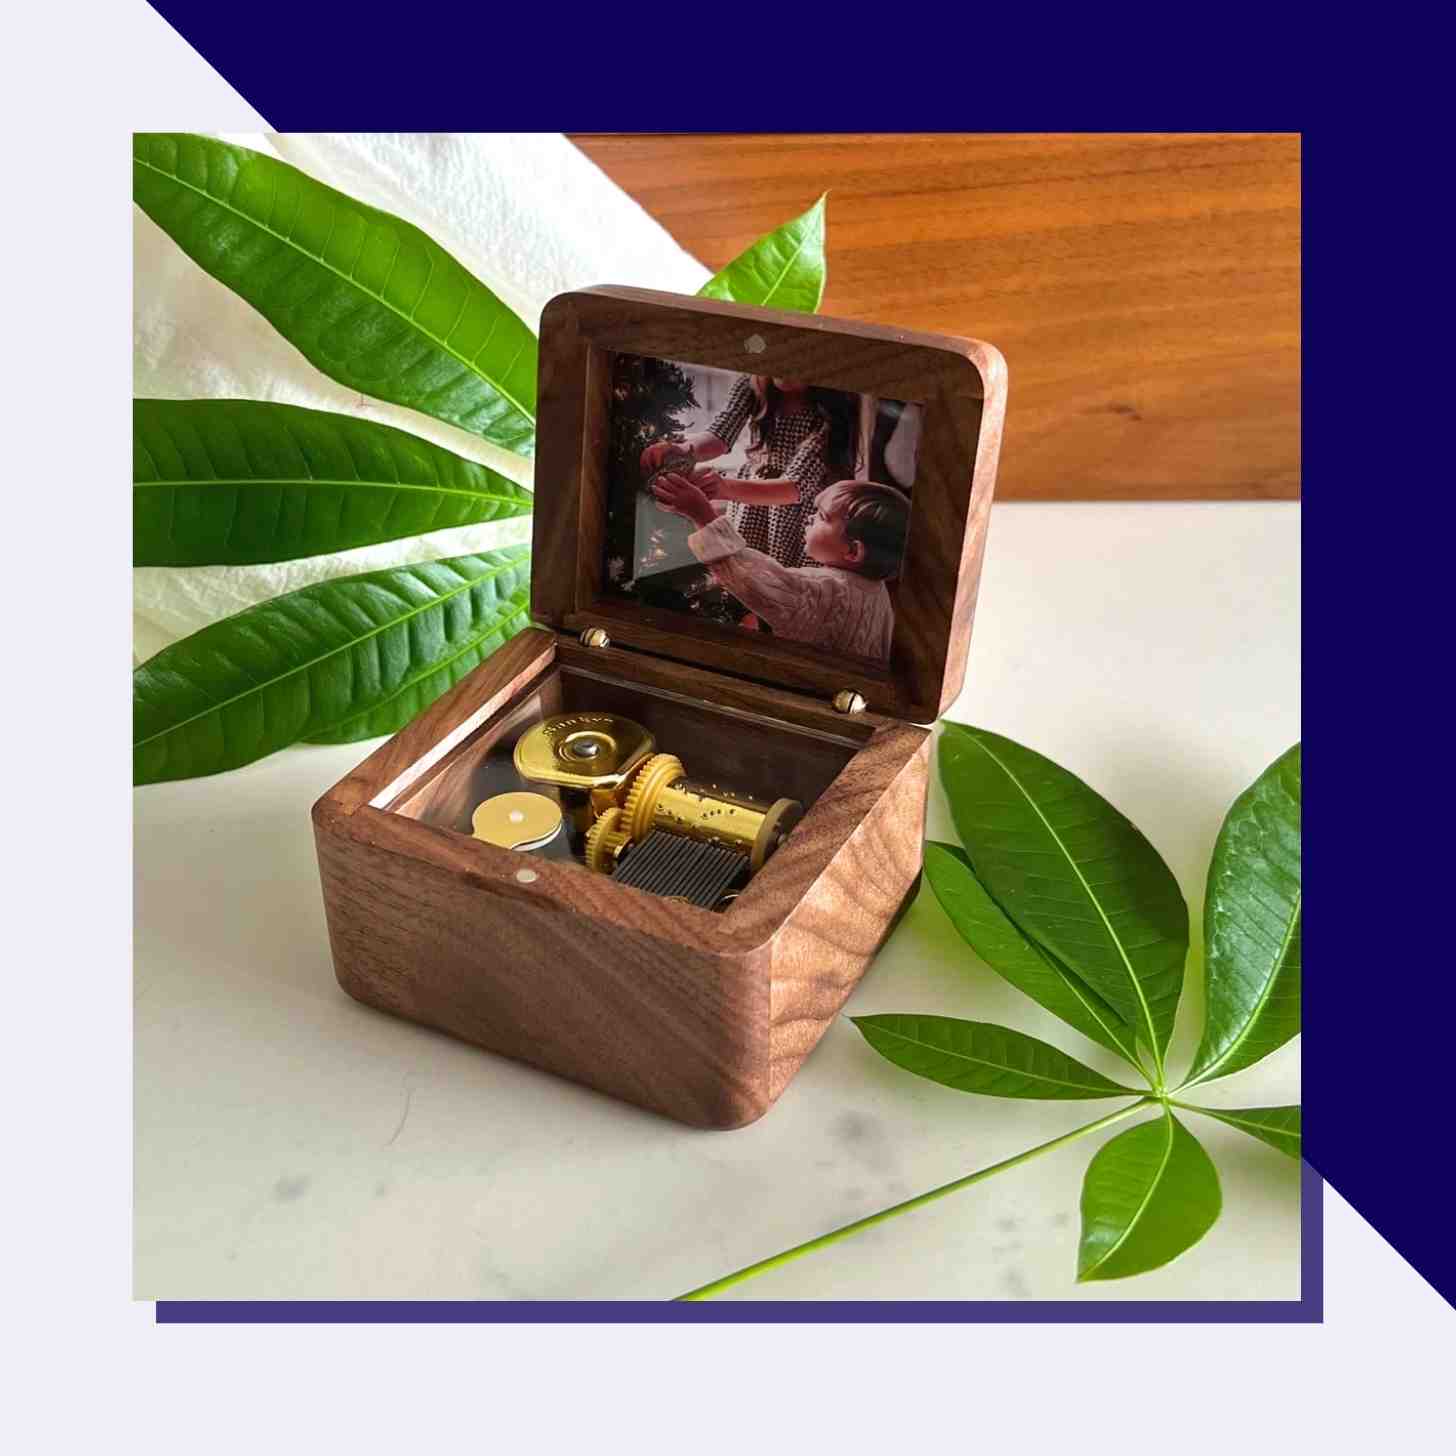 A Wooden Custom Music Box With A Family Picture Inside